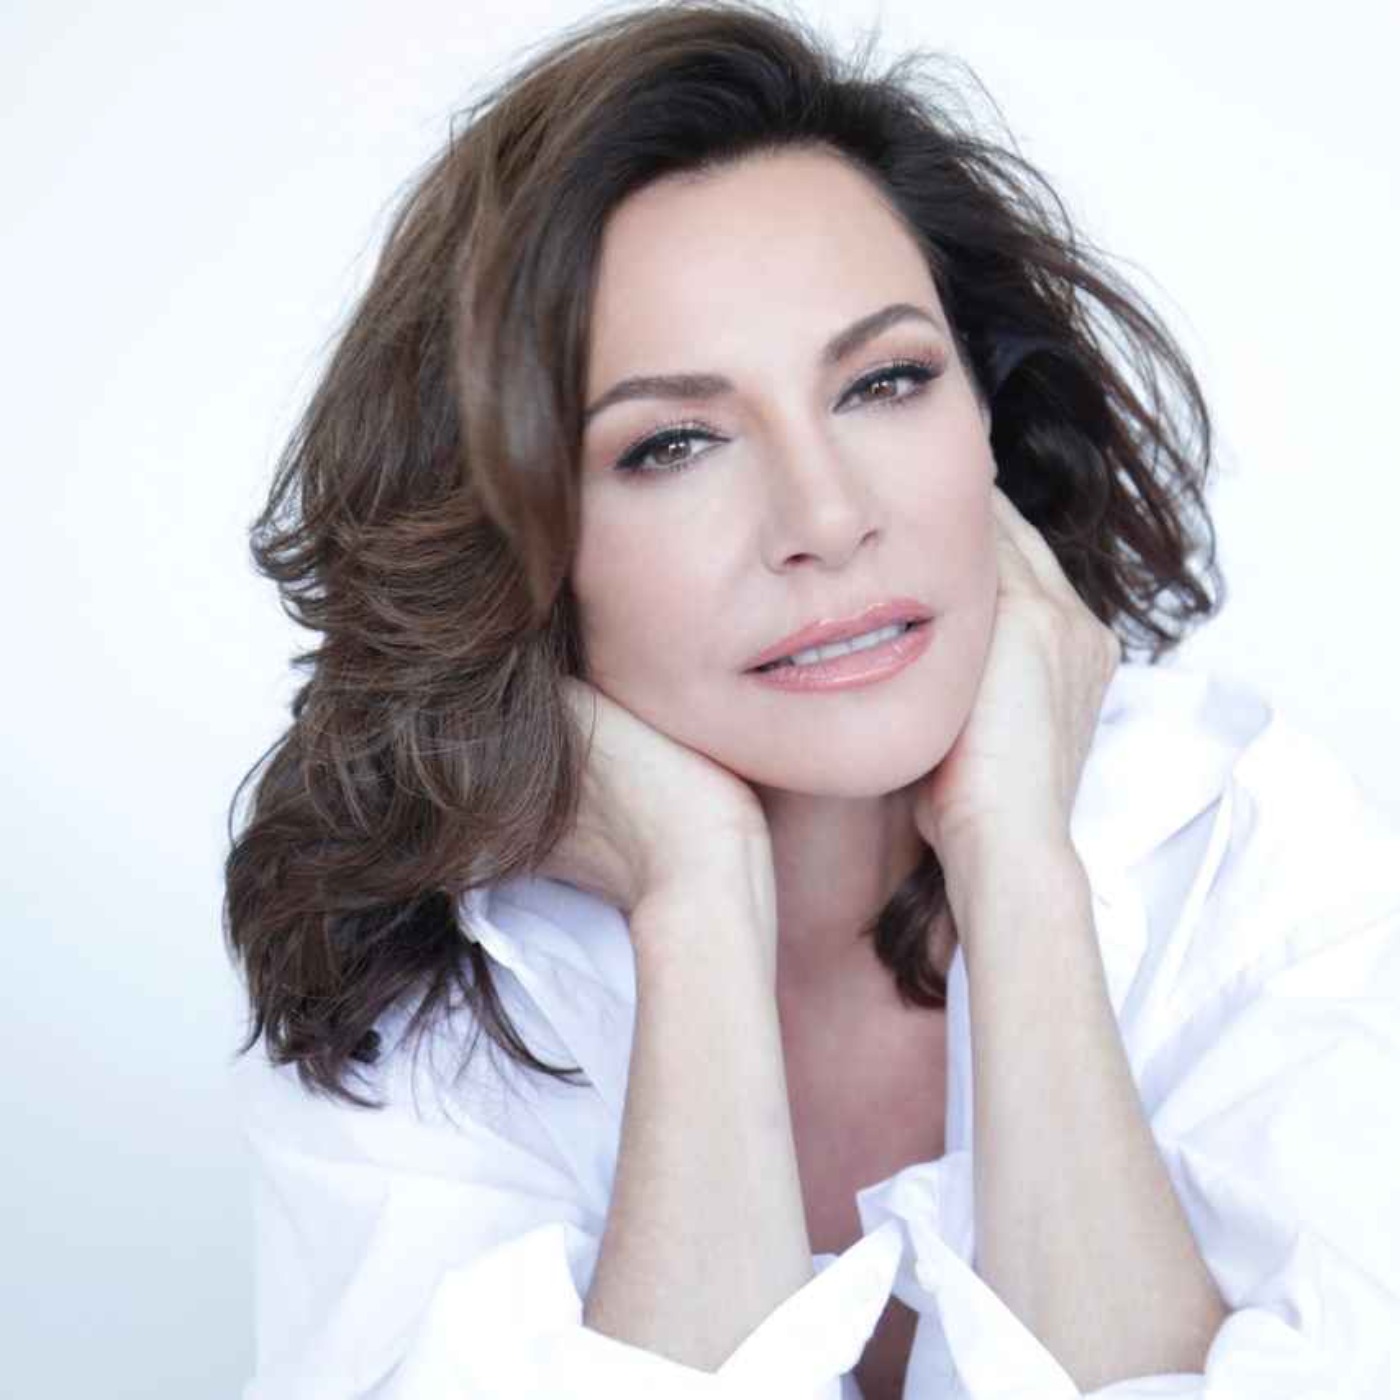 From Housewives to Cabaret with Luann de Lesseps